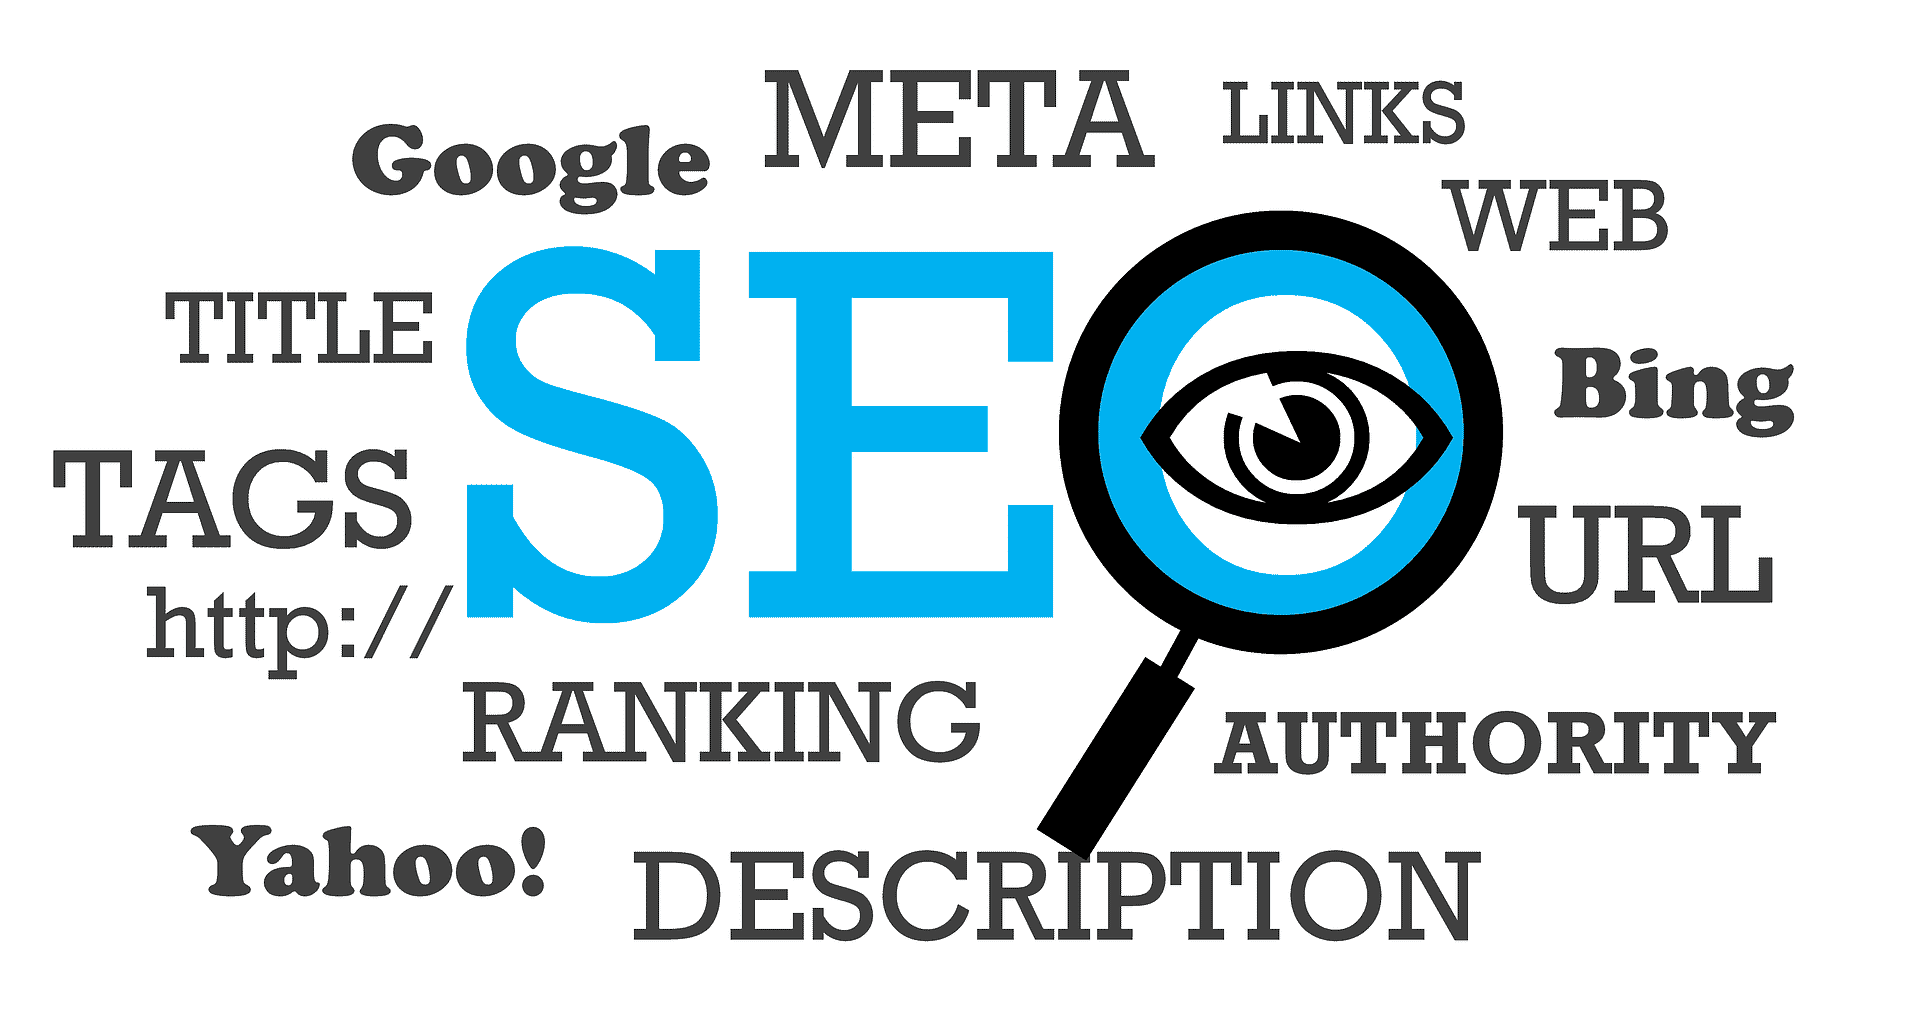 A word cloud with the term "SEO" in the middle surrounded by other words such as "Google," "Meta," "Title Tags," "Ranking," and more.